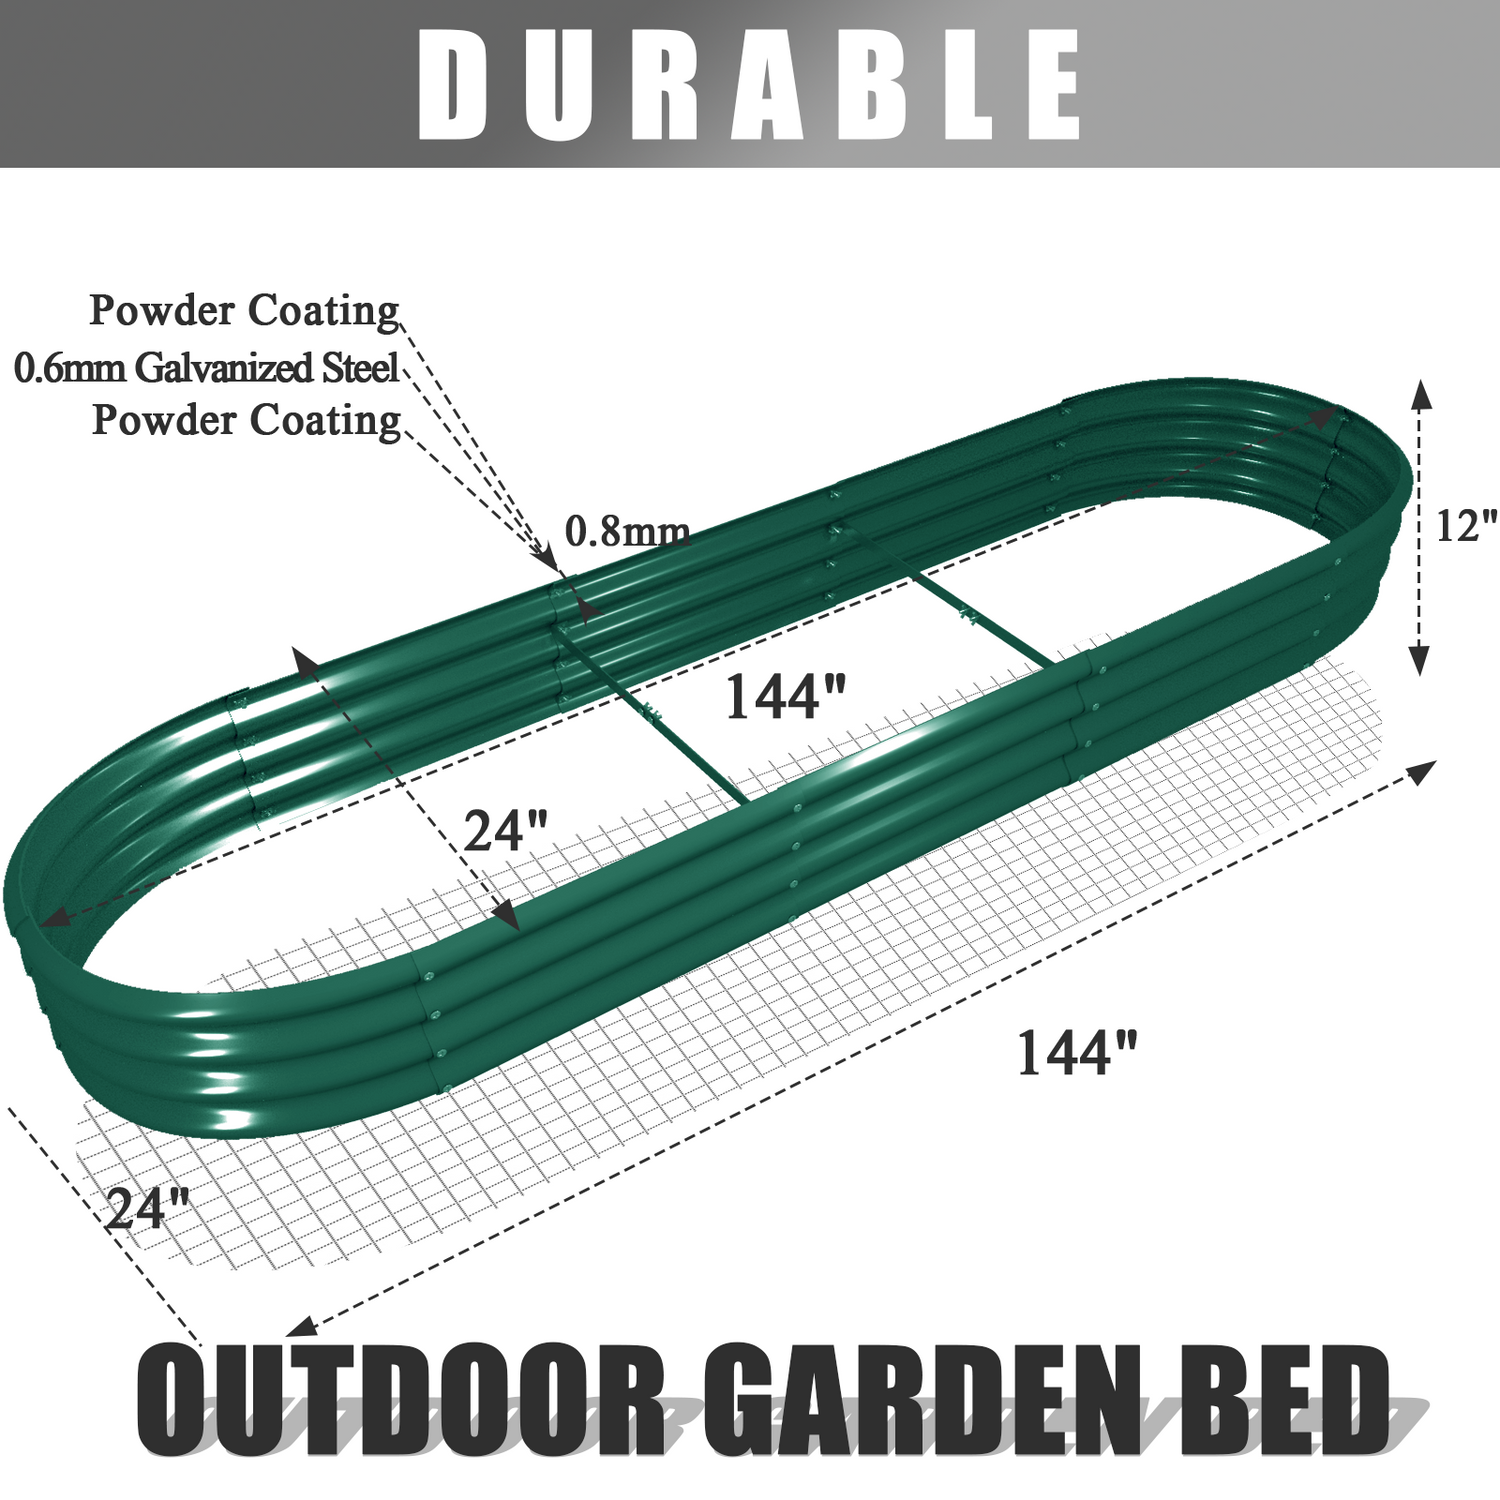 Bundle of 4 | 12" Tall 12x2ft Oval Metal Raised Garden Bed in Green with Gopher Wire Mesh